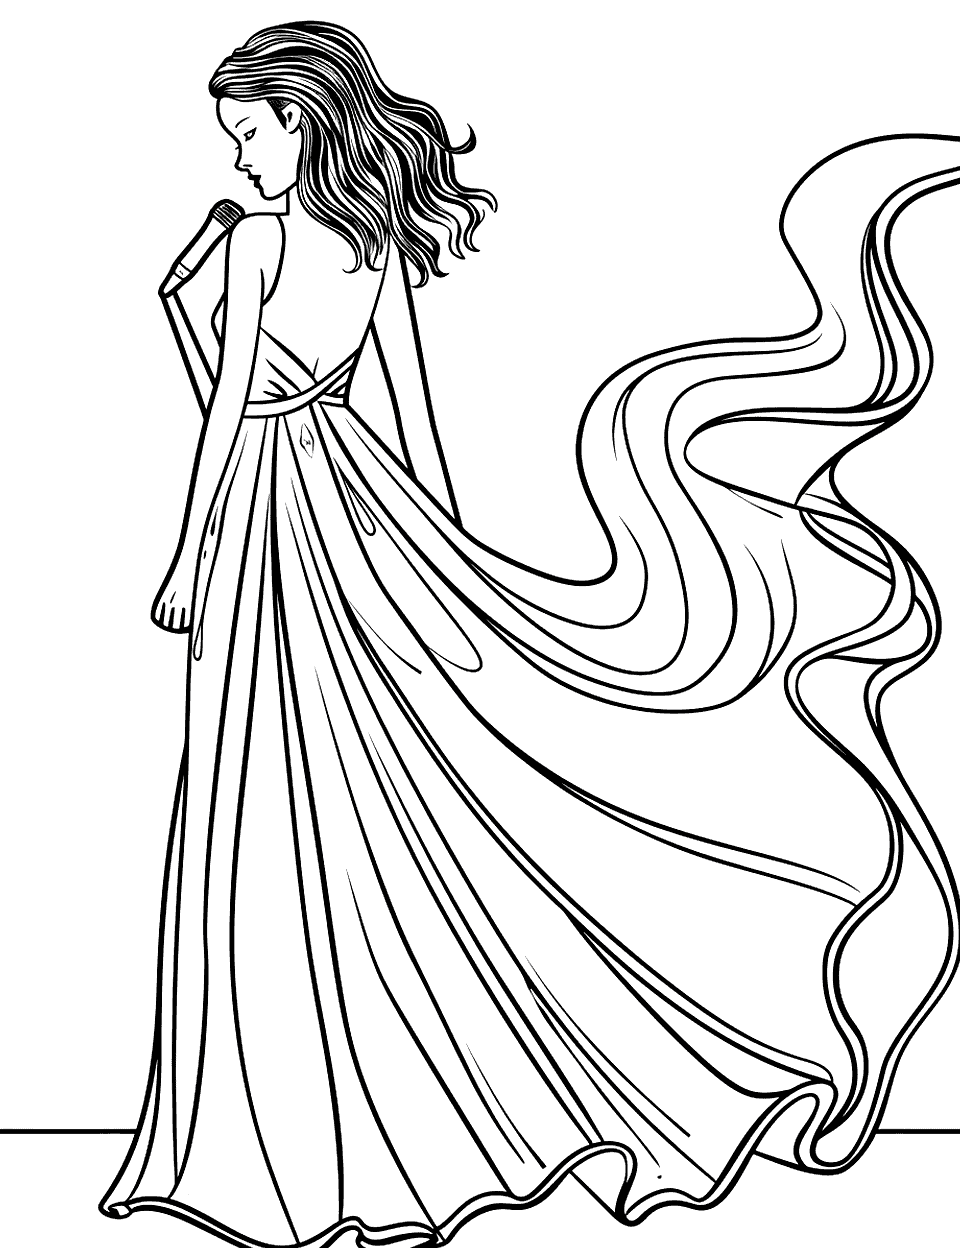 Operatic Performance Music Coloring Page - A young woman dressed in a dramatic gown singing passionately on a simple stage.